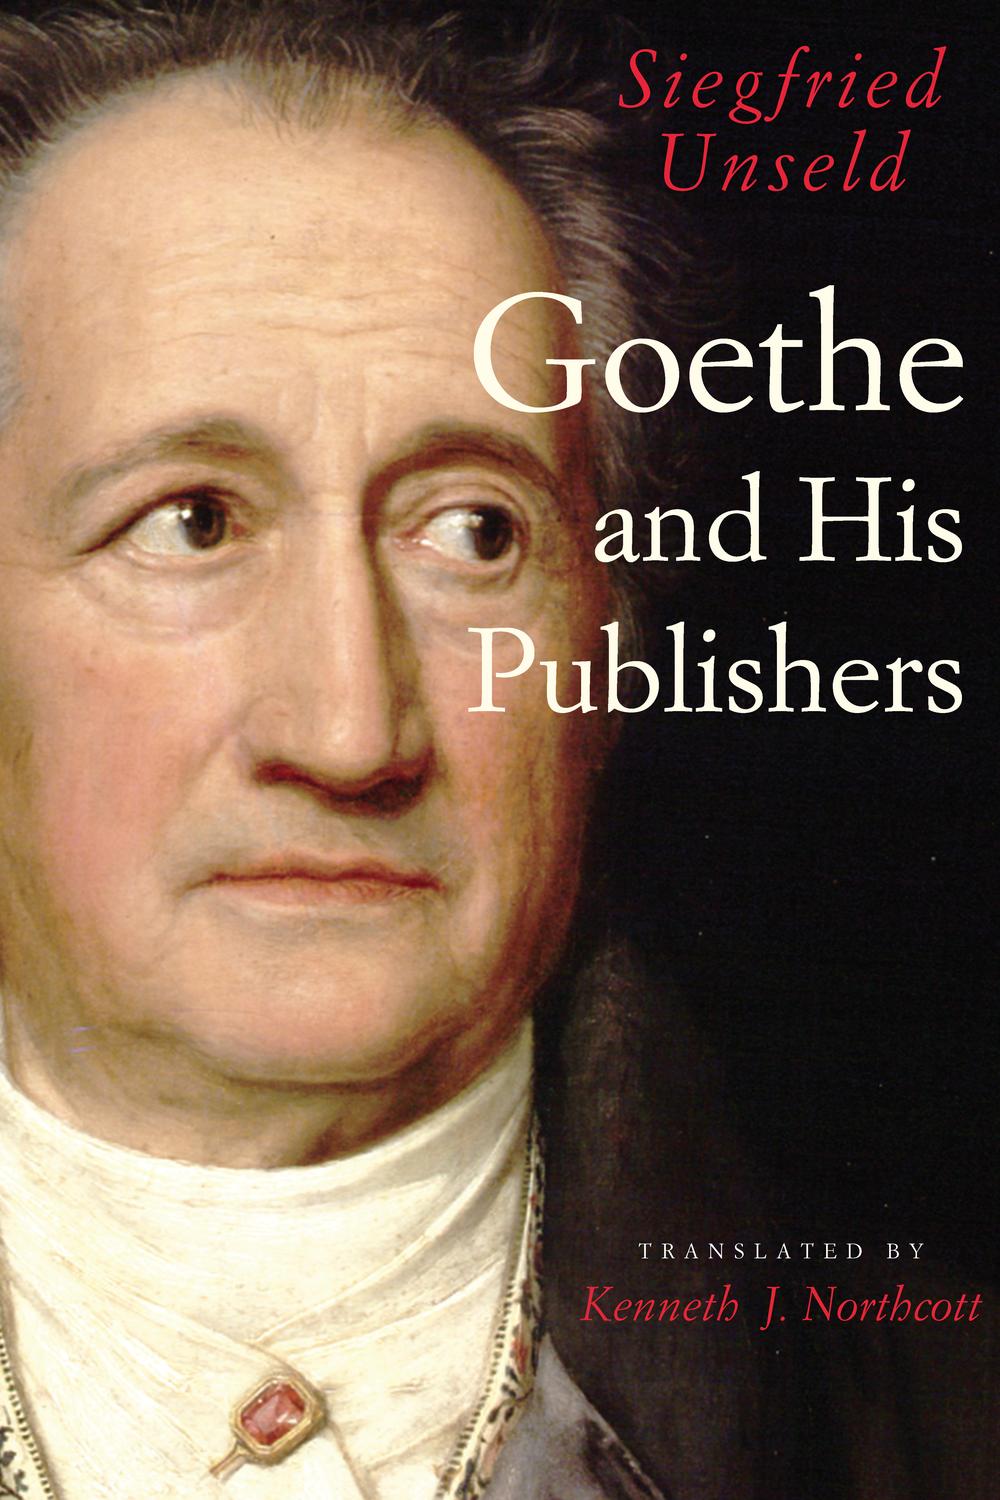 Goethe and His Publishers - Siegfried Unseld, Kenneth J. Northcott